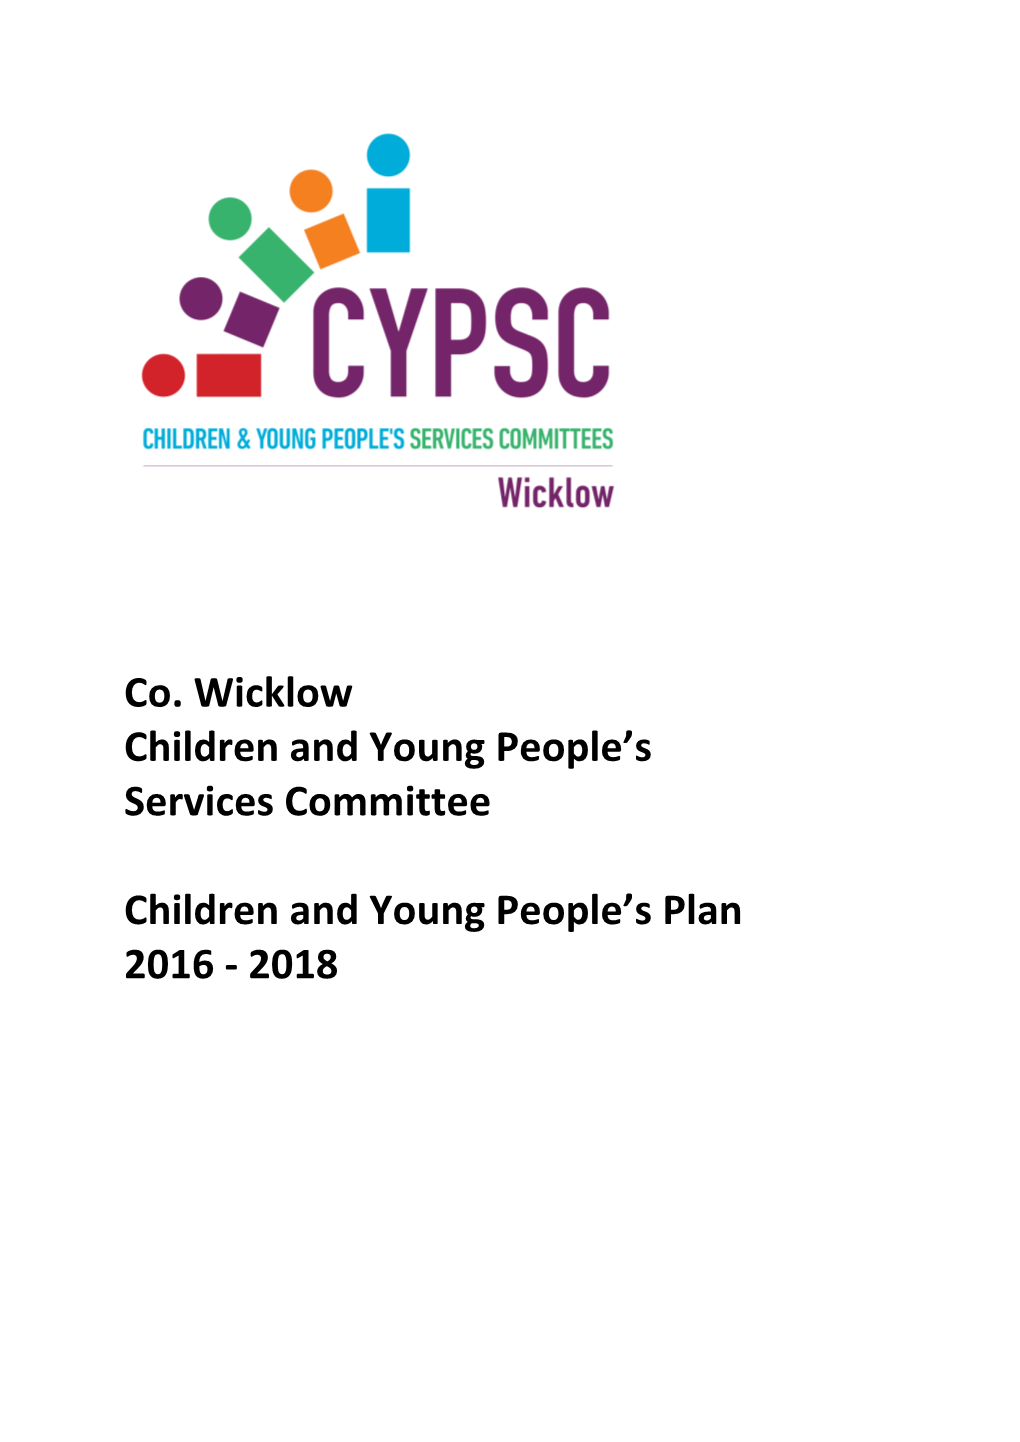 Wicklow CYPSC Children and Young People's Plan 2016-2018